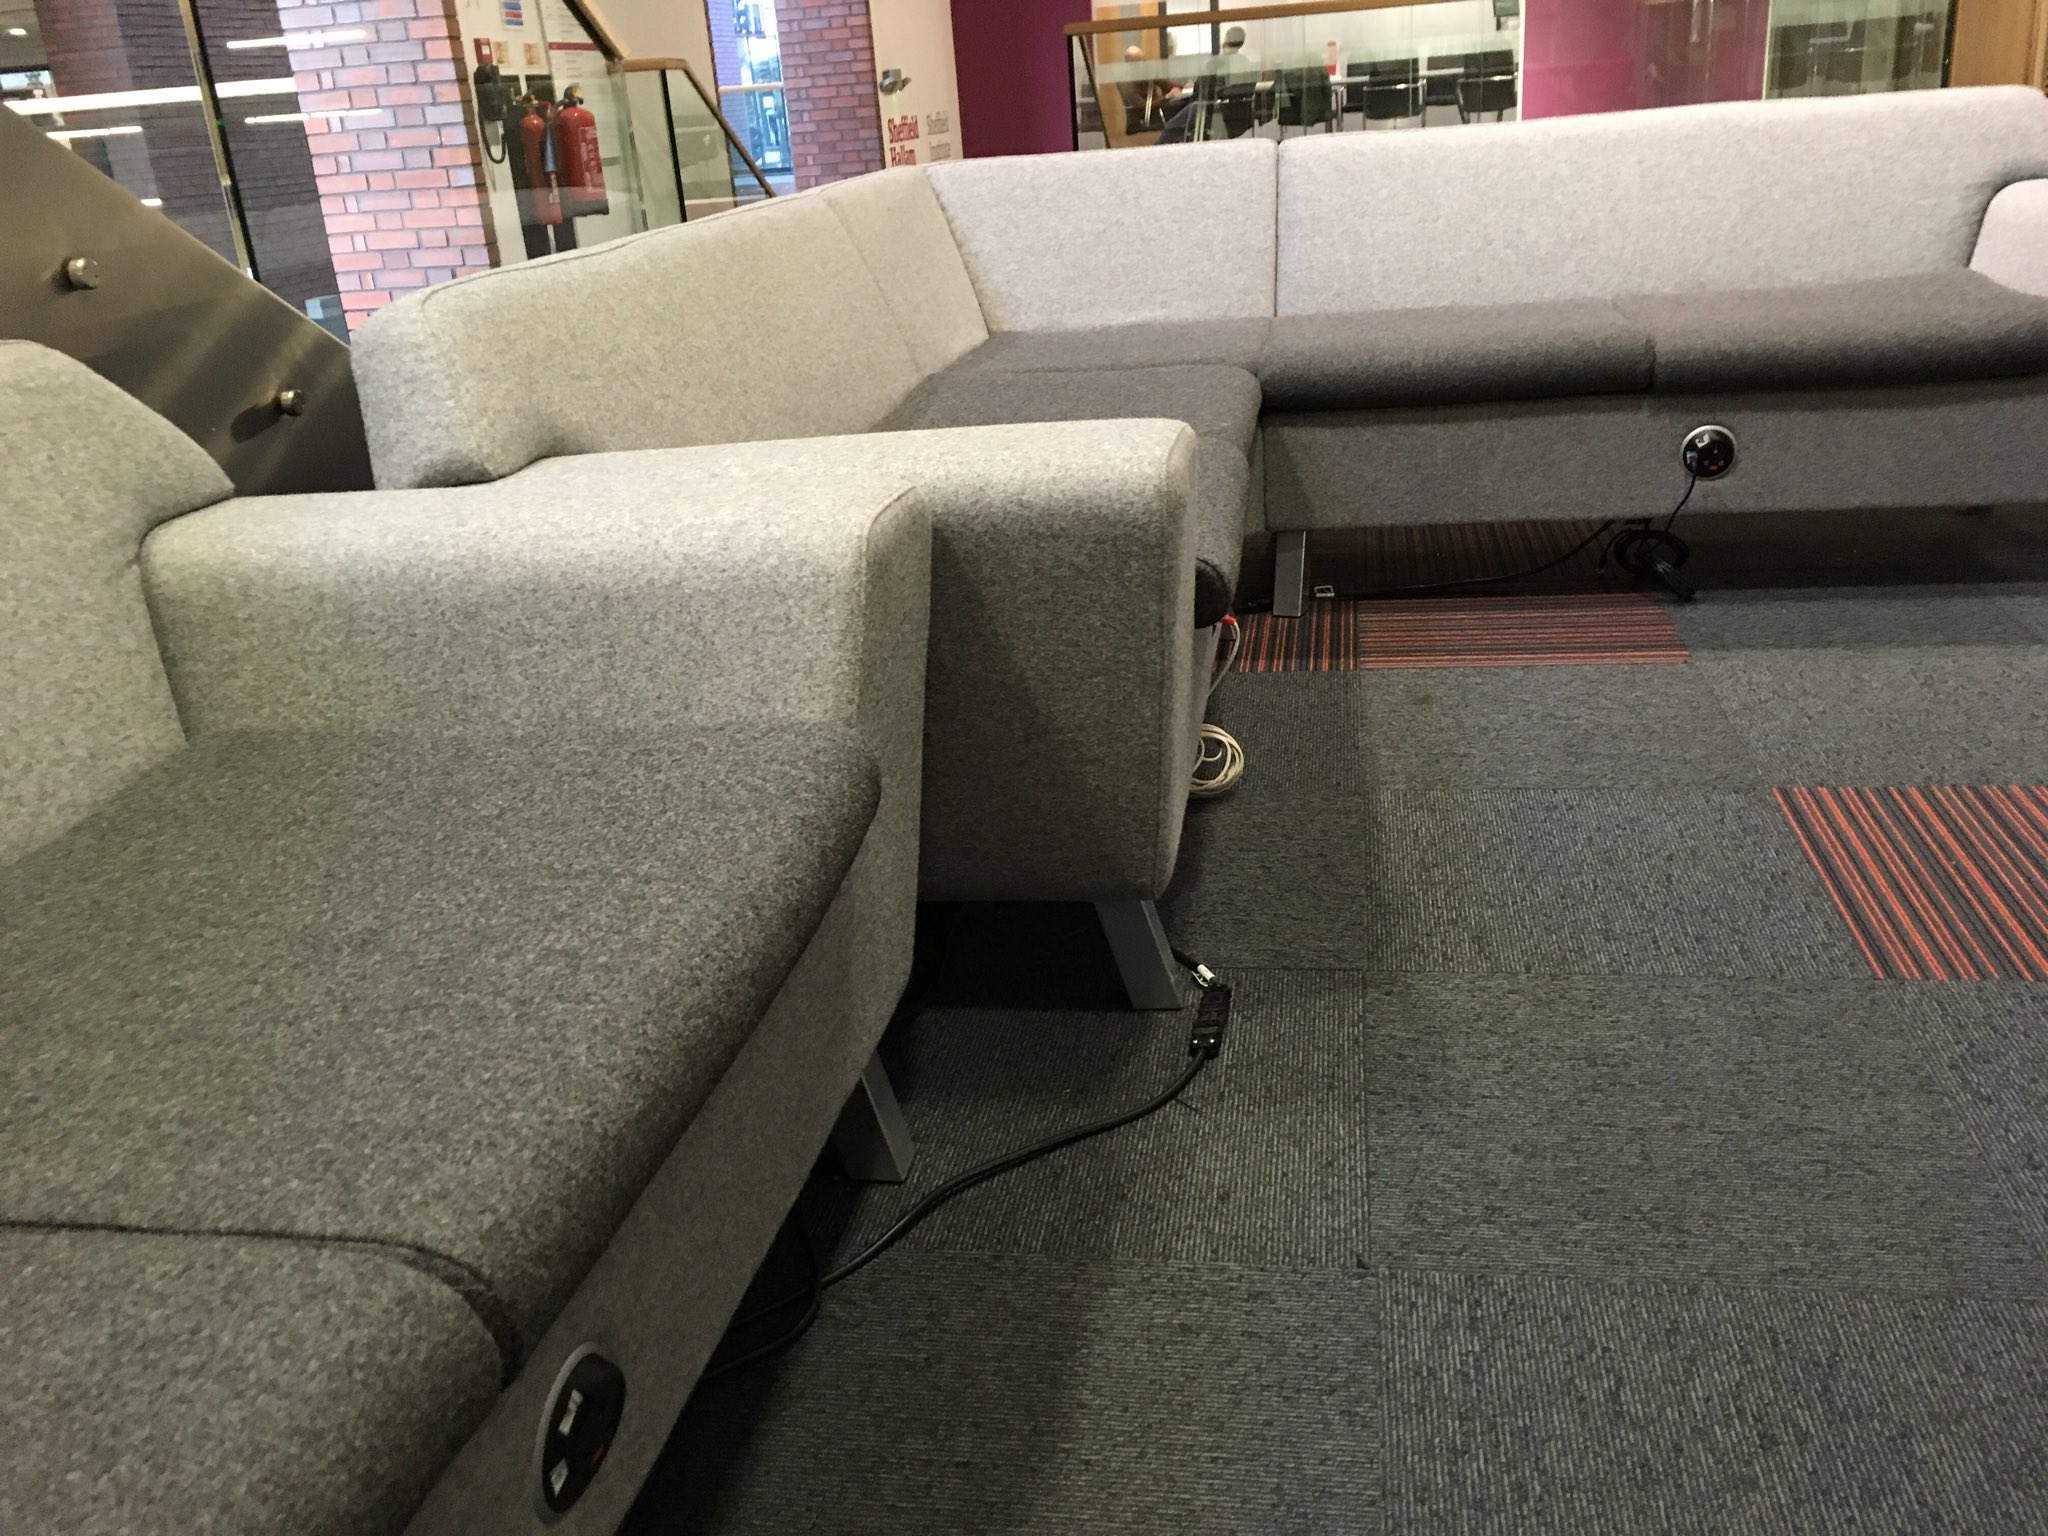 Plugs in the sofas! Happy thought indeed  #SocMedHE17 https://t.co/EtTvlQnuKw